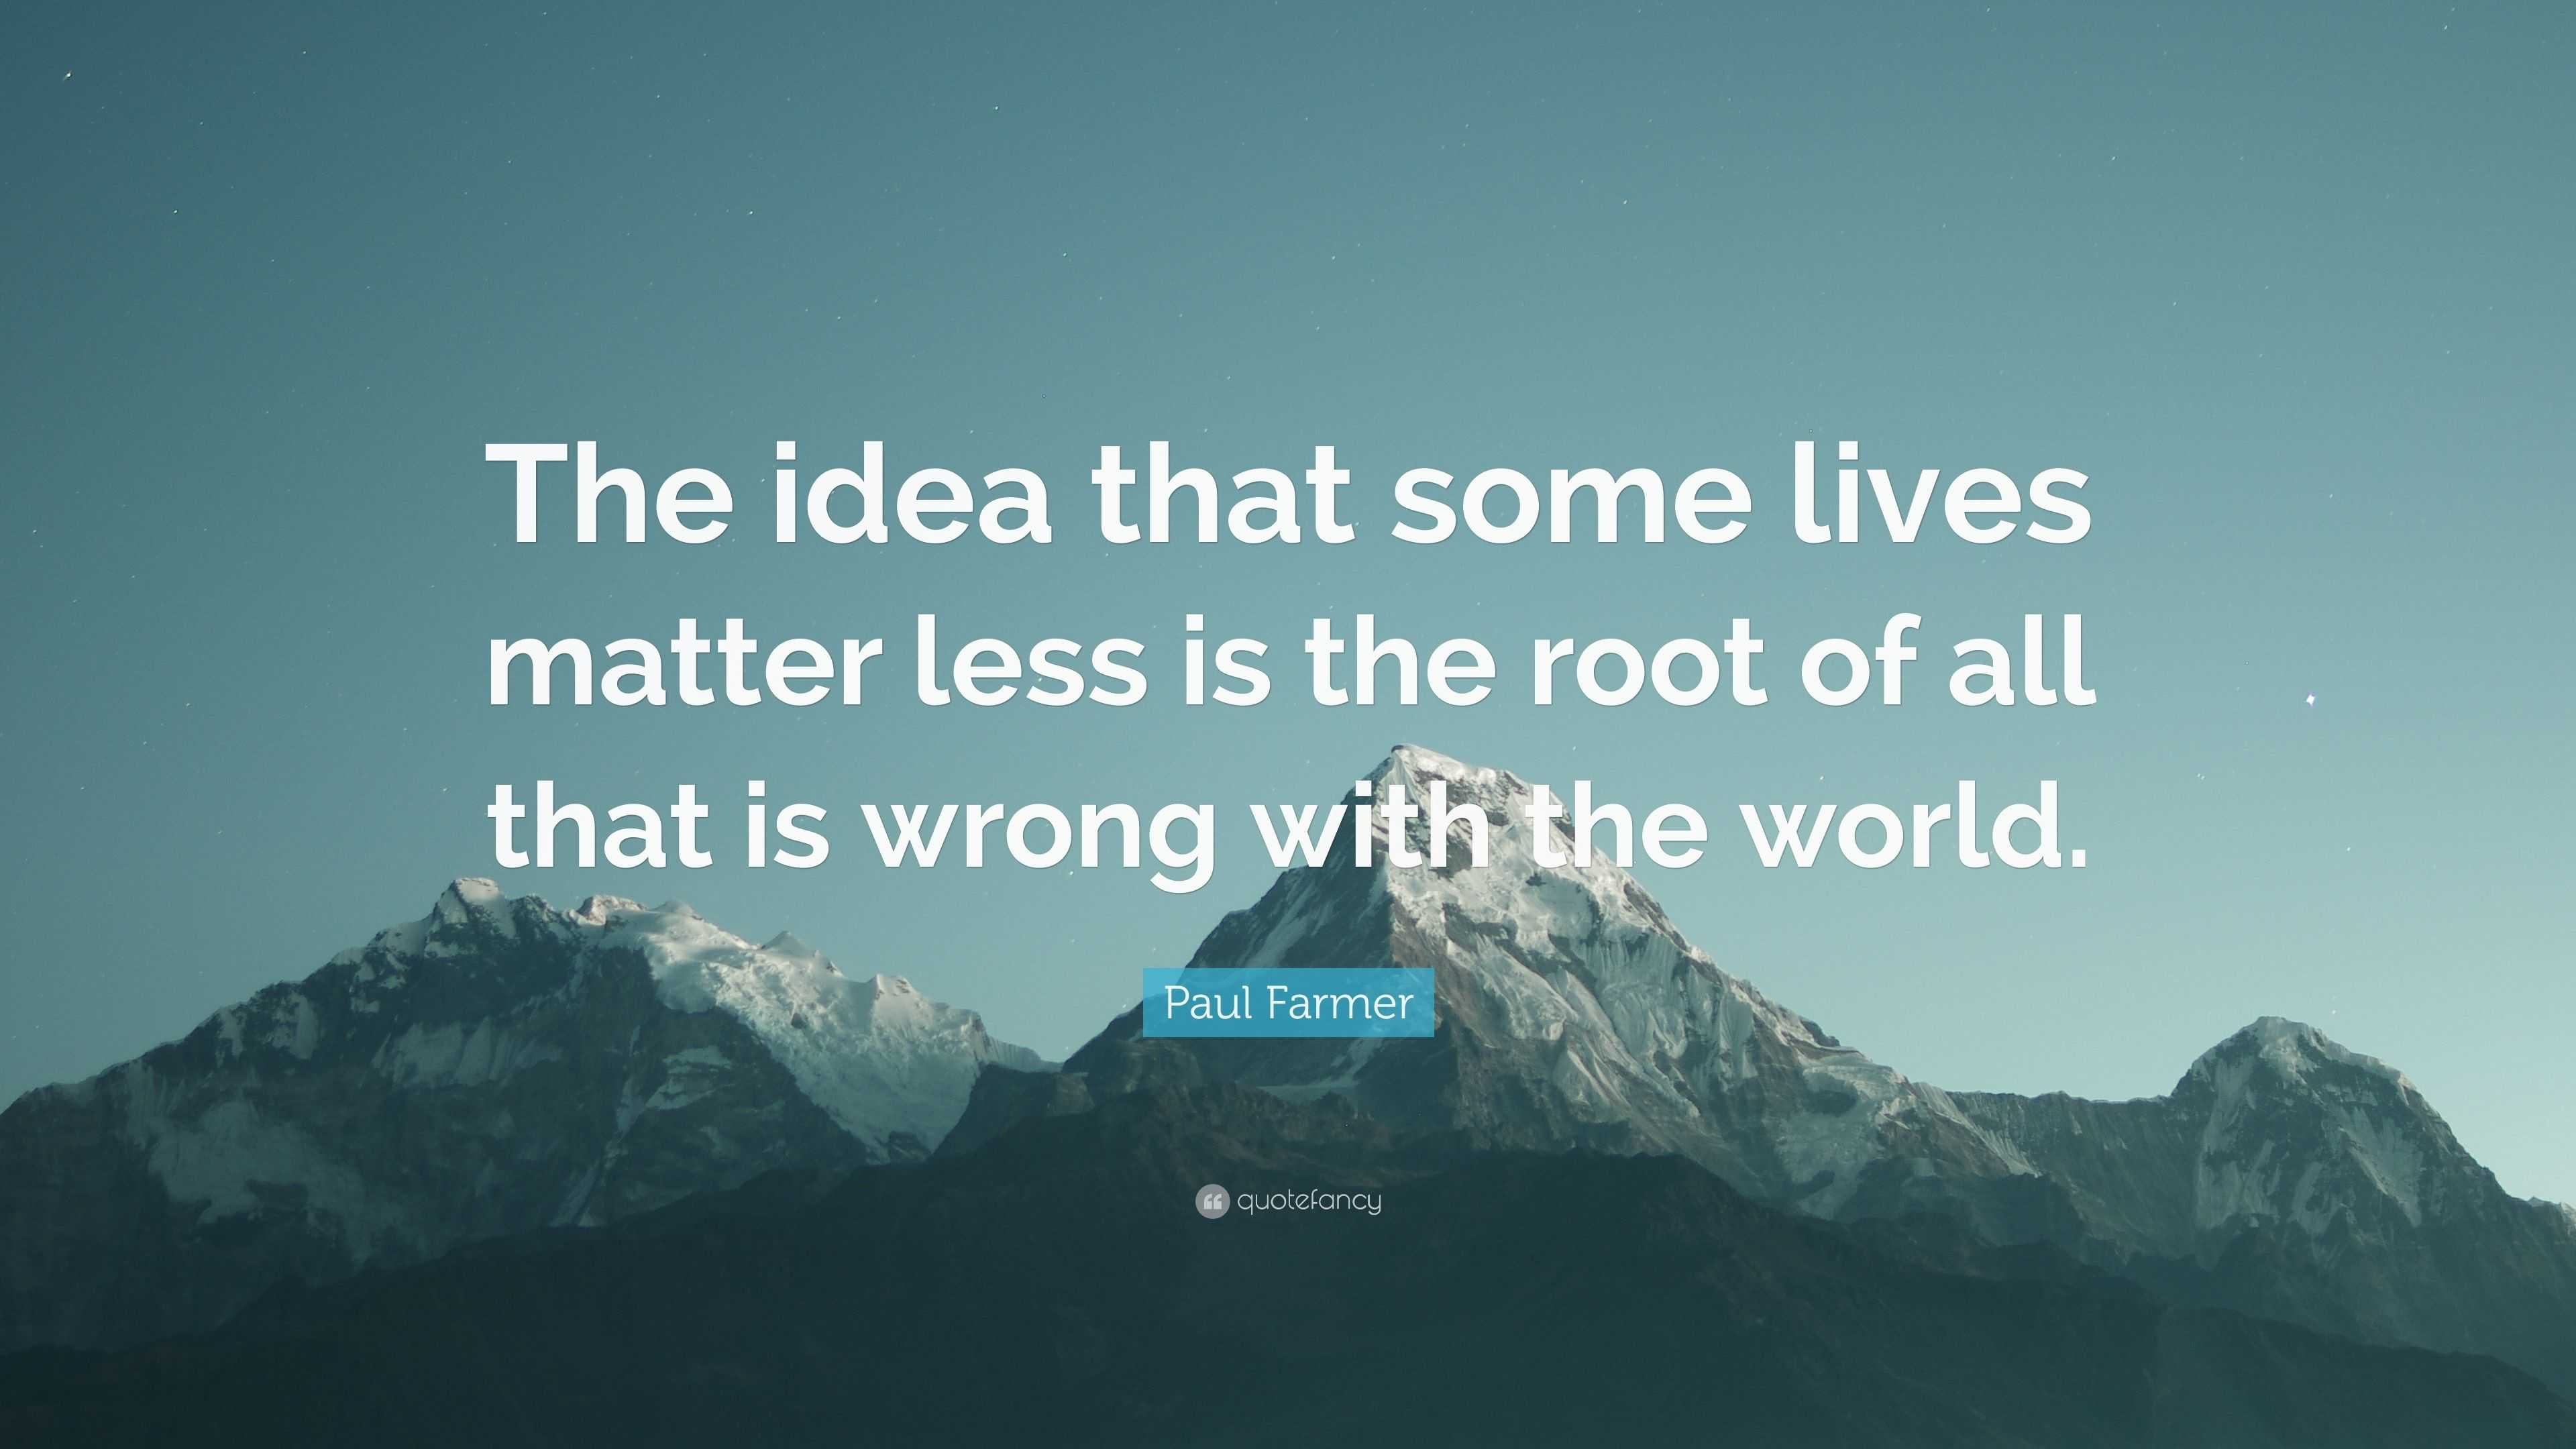 Paul Farmer Quote: "The idea that some lives matter less ...